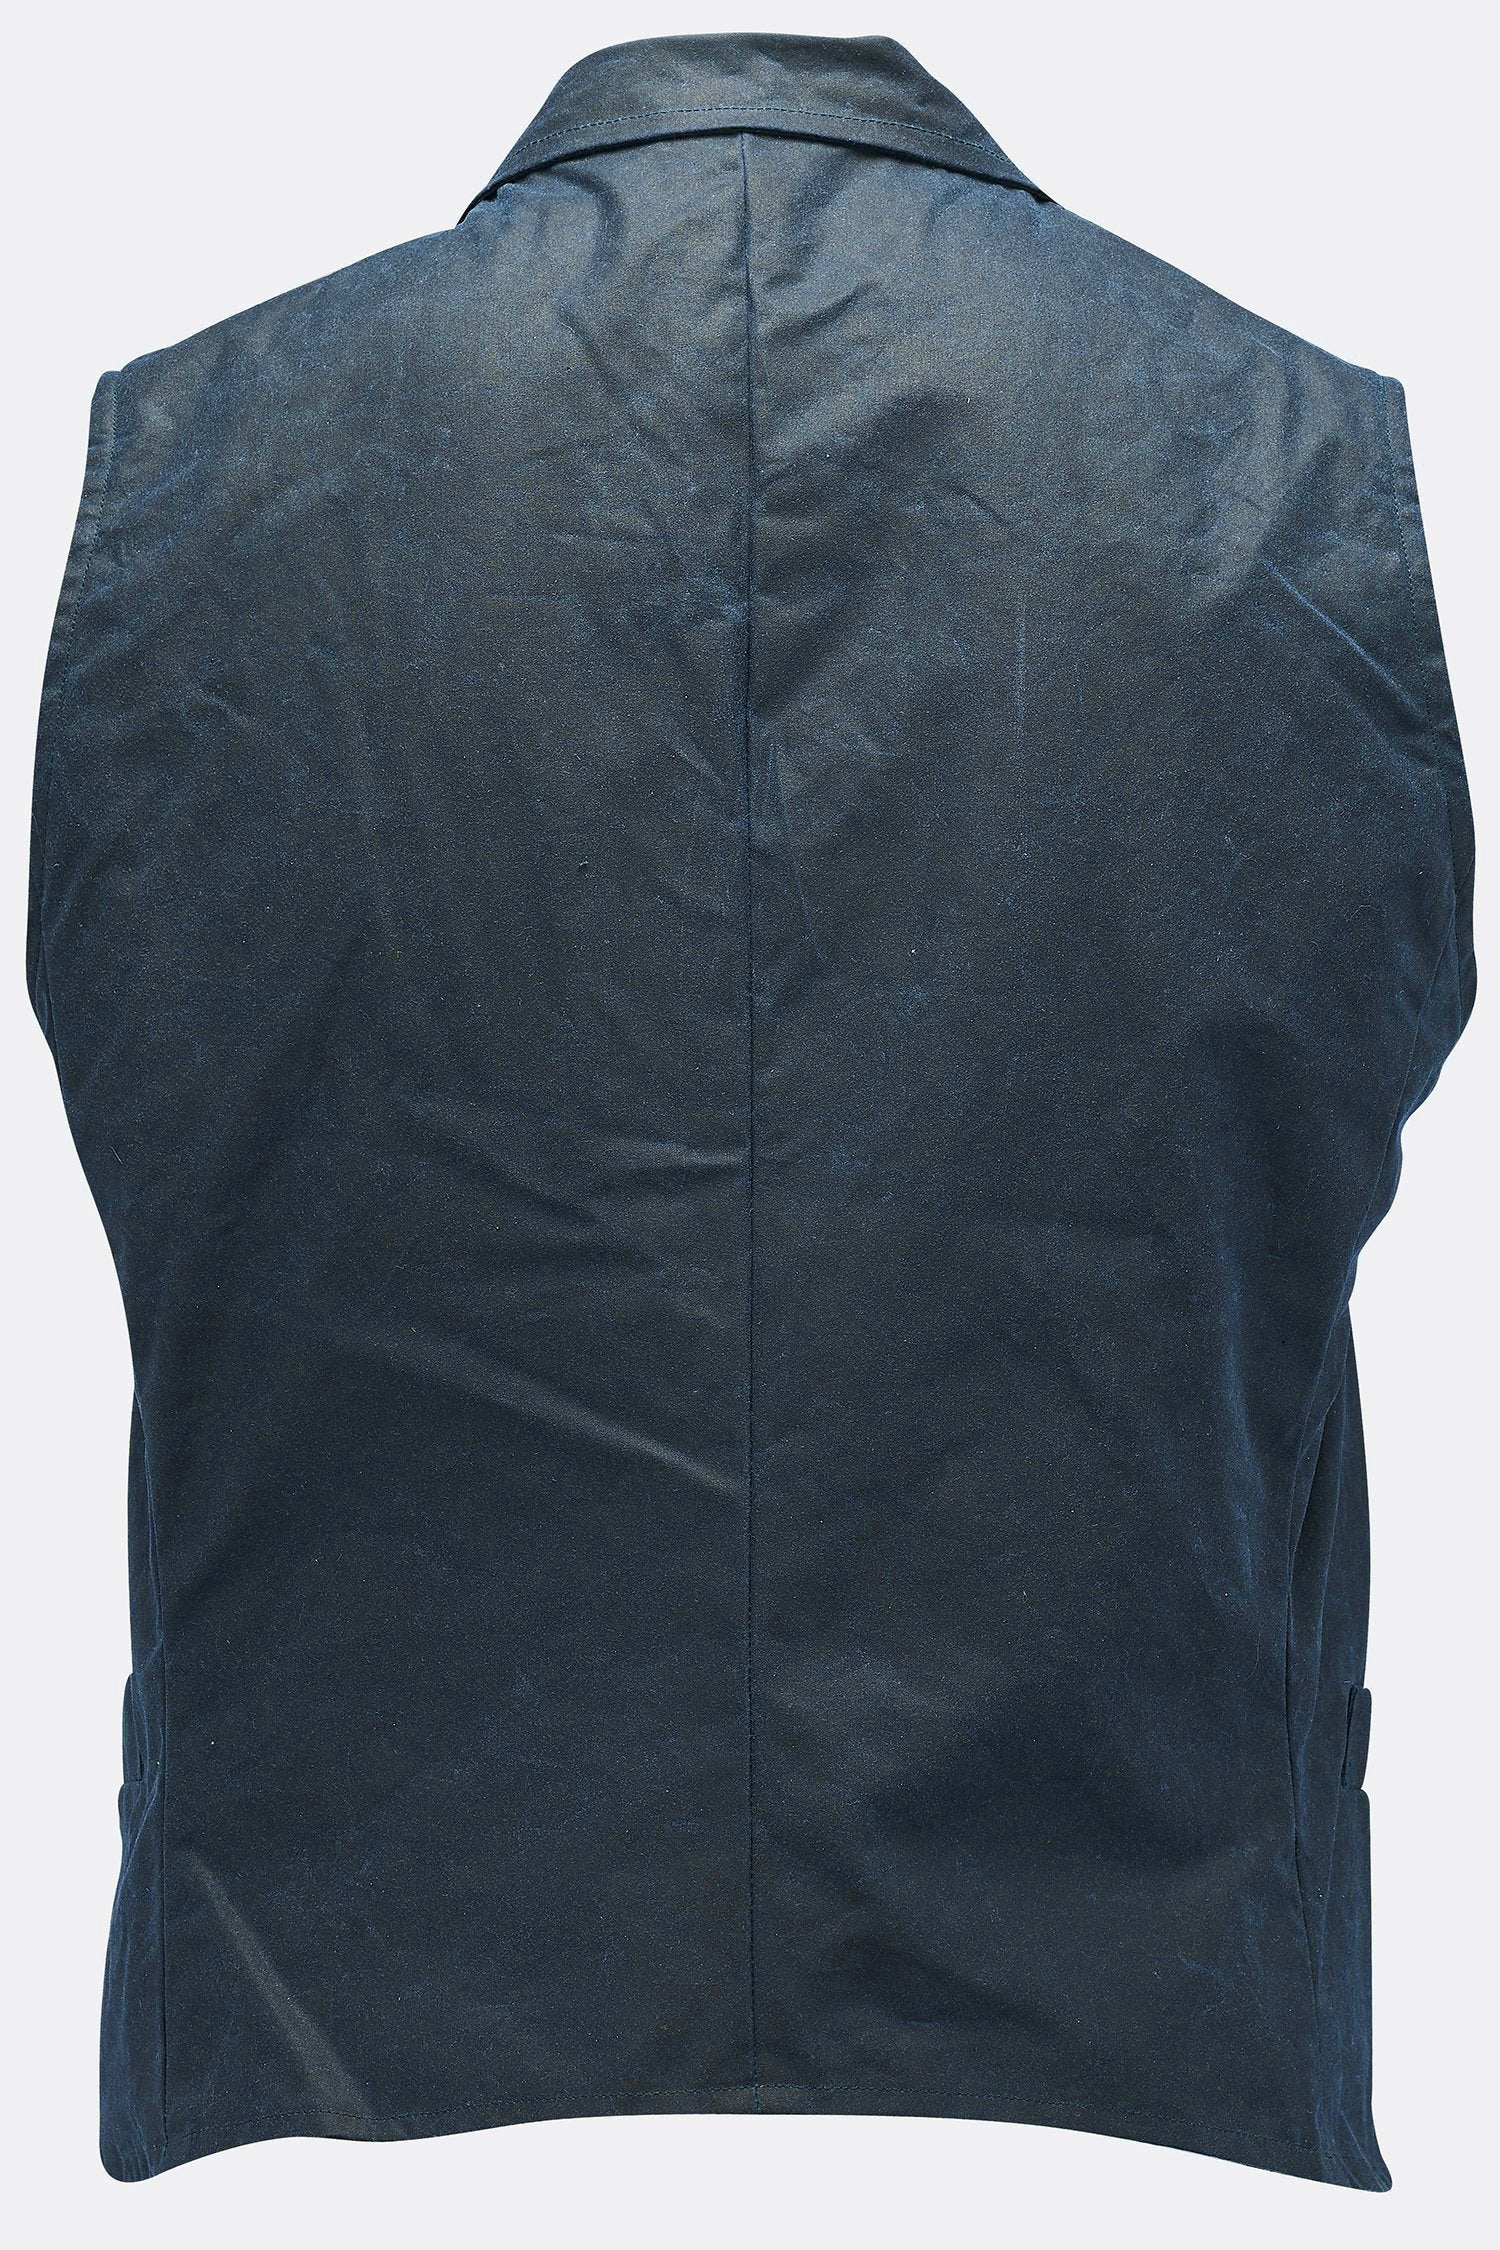 SHEPPARD WAISTCOAT IN NAVY WAXED COTTON-menswear-A Child Of The Jago